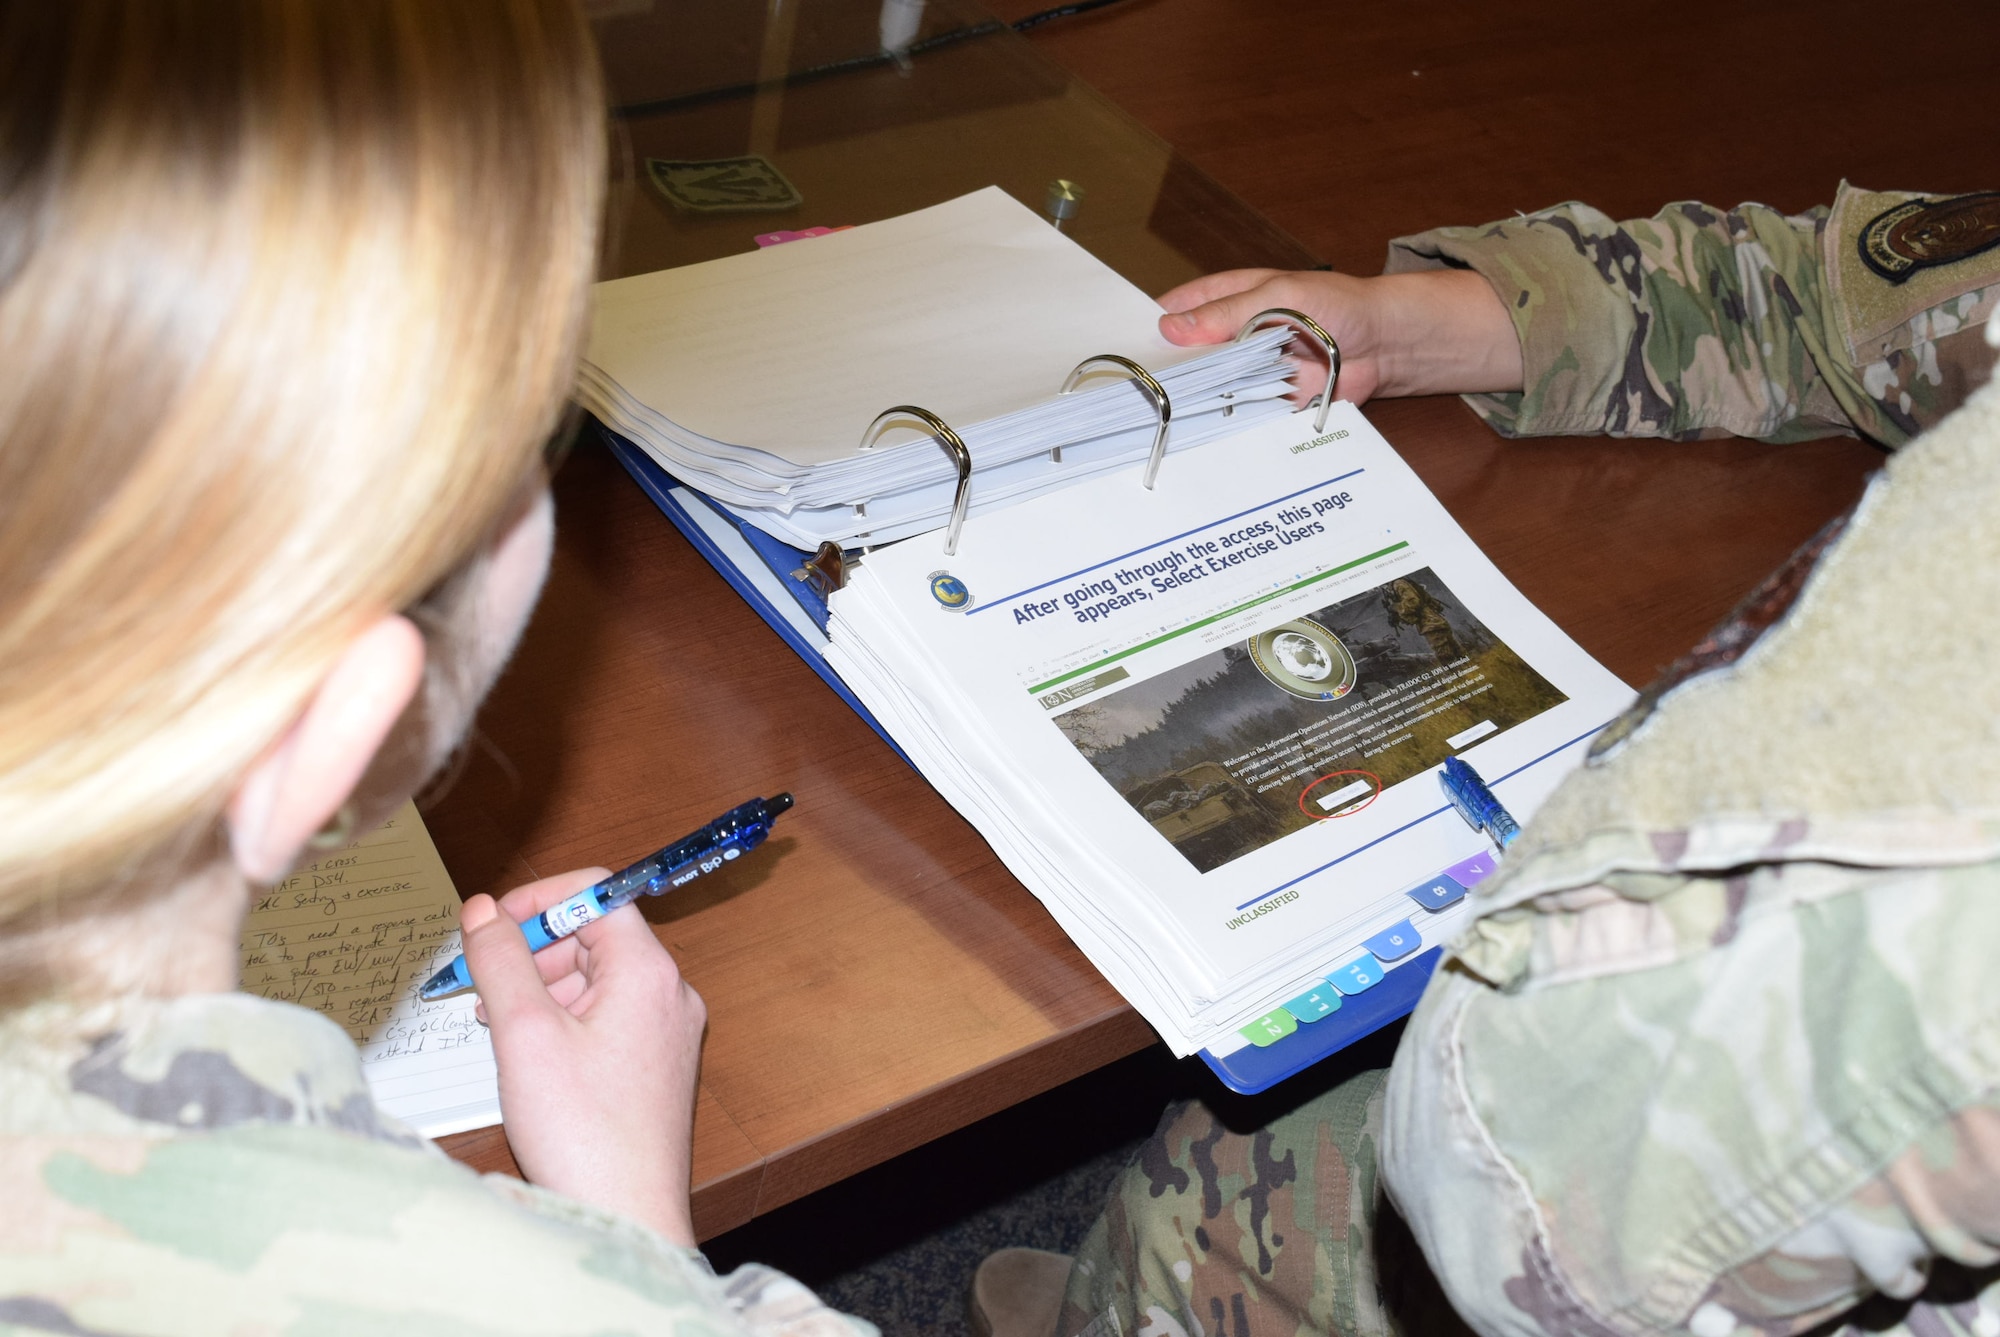 Over the shoulder photo of two U.S. Air Force Airmen in uniform looking at a blue binder.